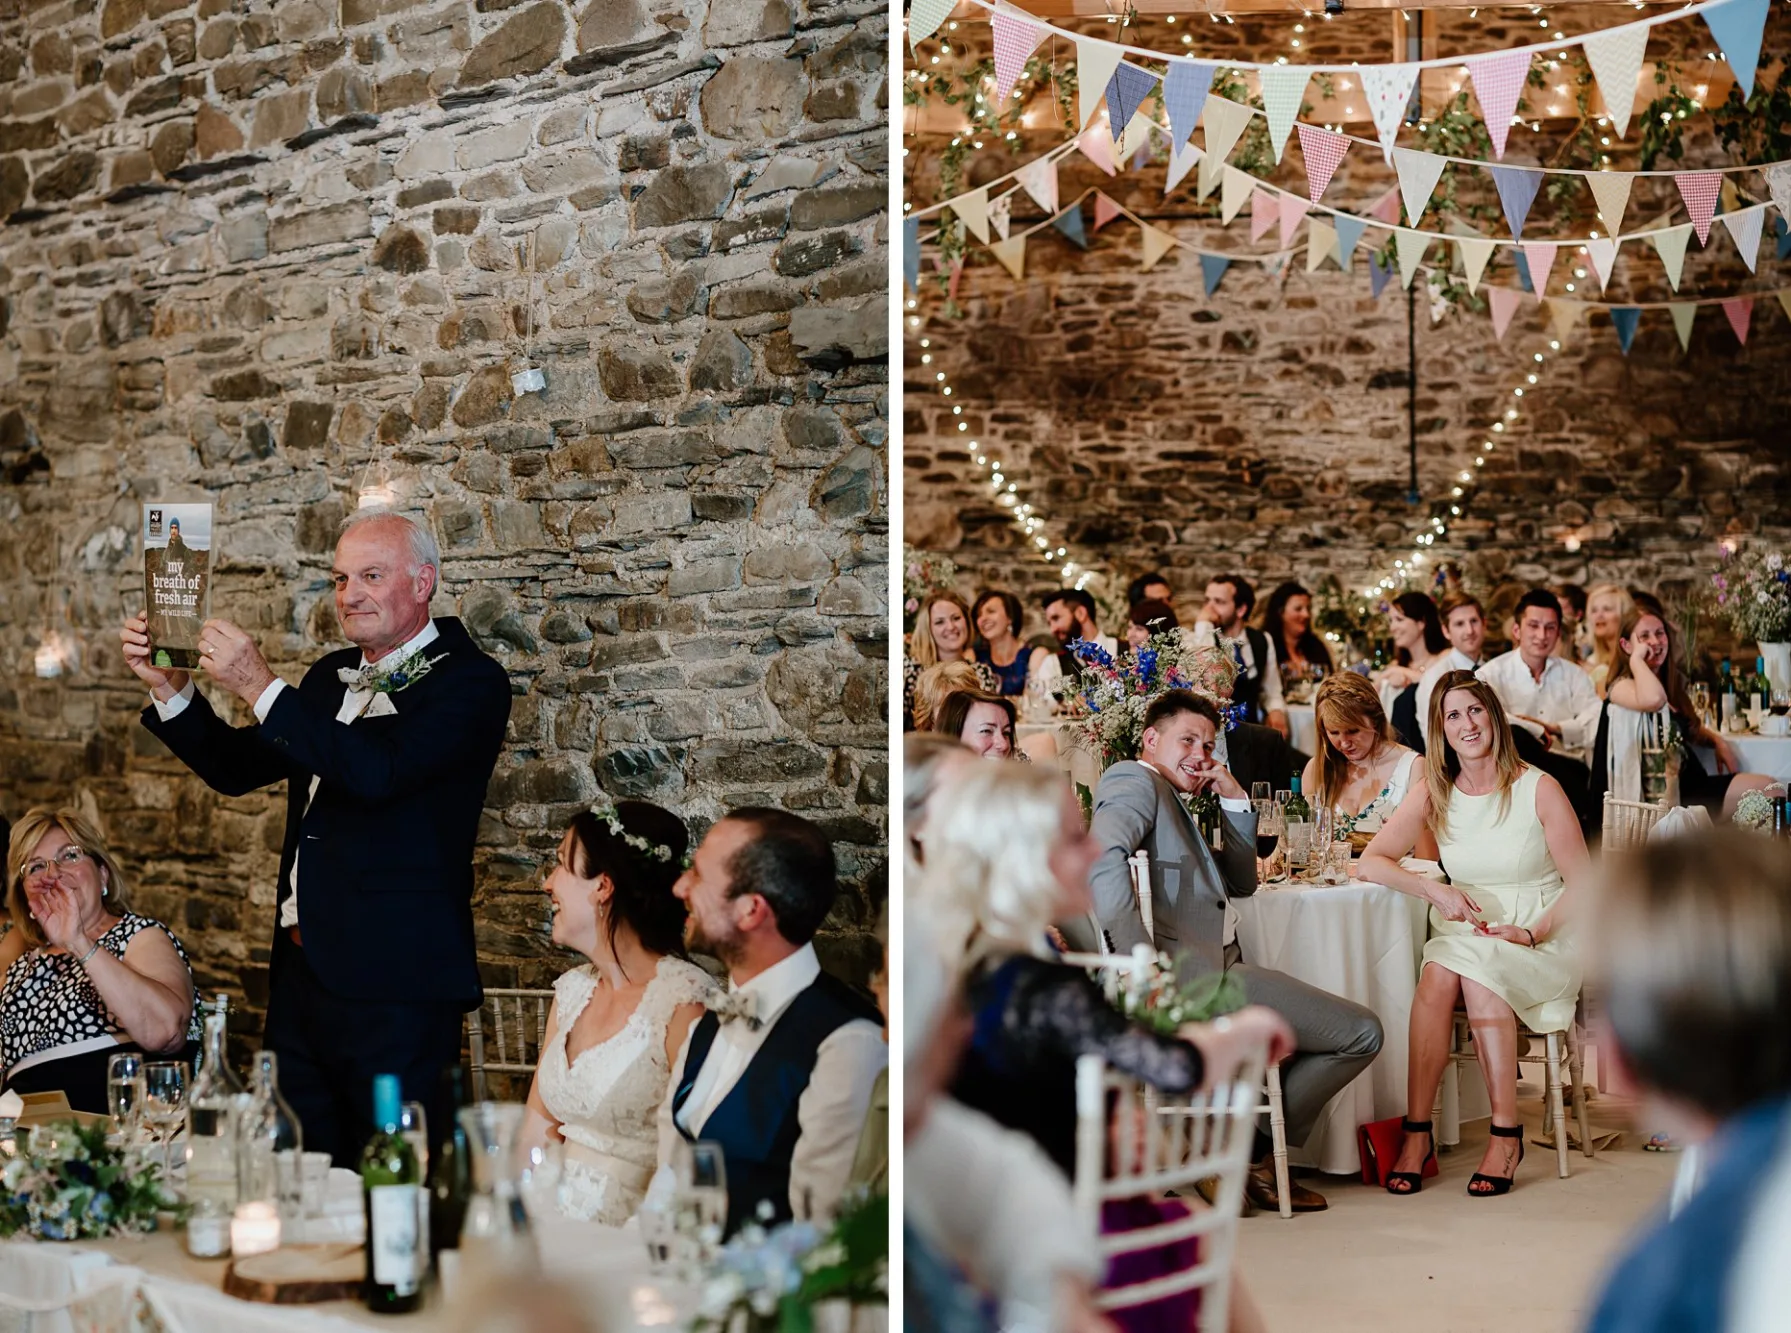 First image: Brides father making a speech during their wedding at New House Farm. Second image: Wedding guests listening to the speeches in the wedding barn. Bunting is hanging from wooden beams and fairy lights draping down over the stone wall of the barn.